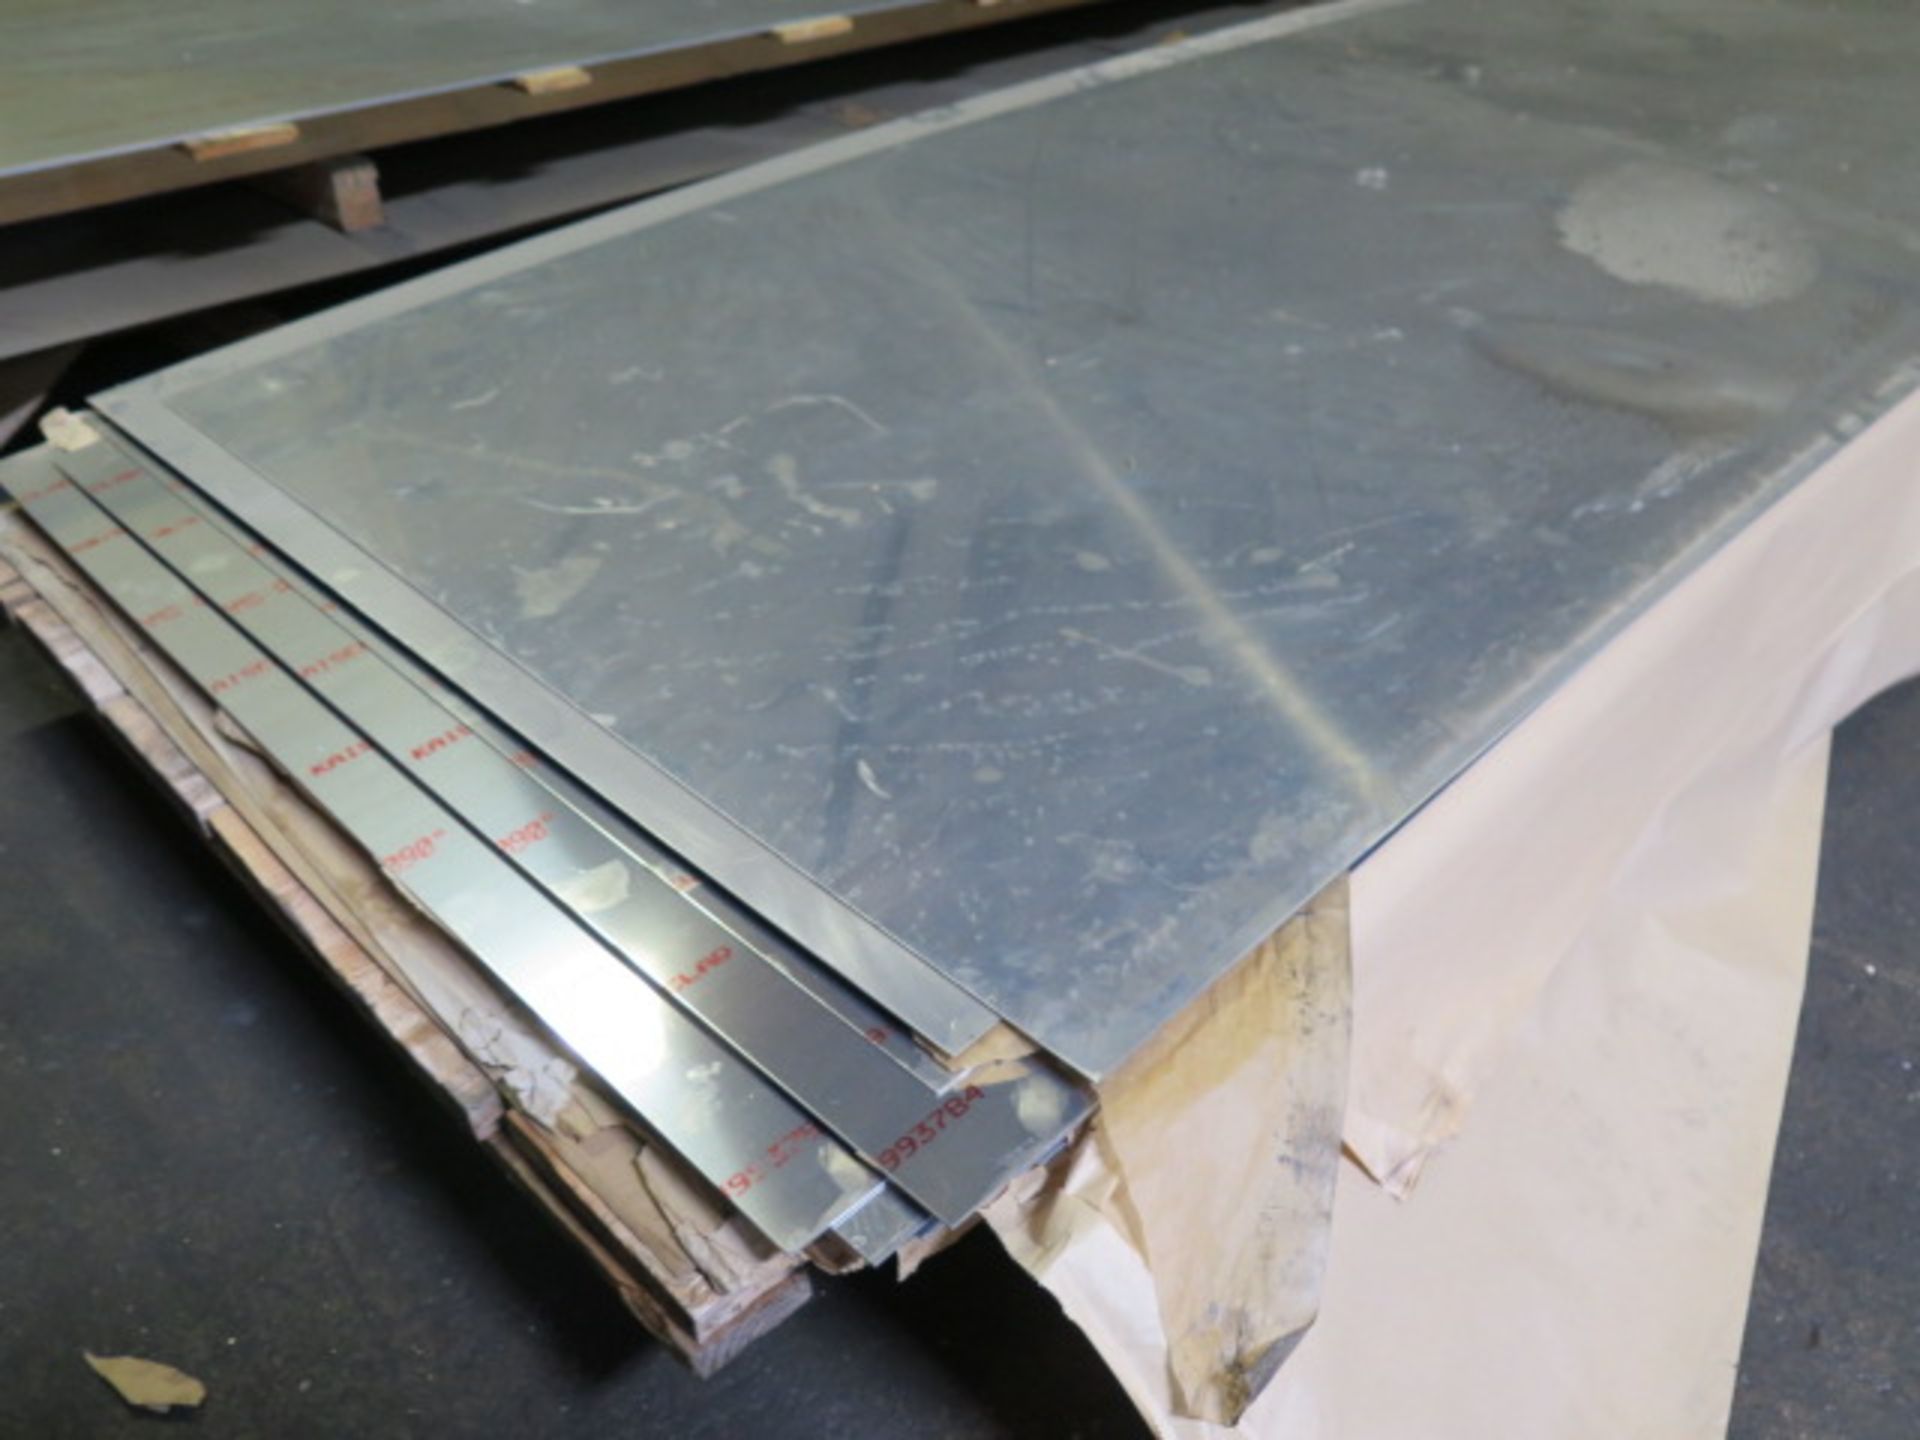 Aluminum Sheet Stock and Misc Bar Stock (SOLD AS-IS - NO WARRANTY) - Image 4 of 21